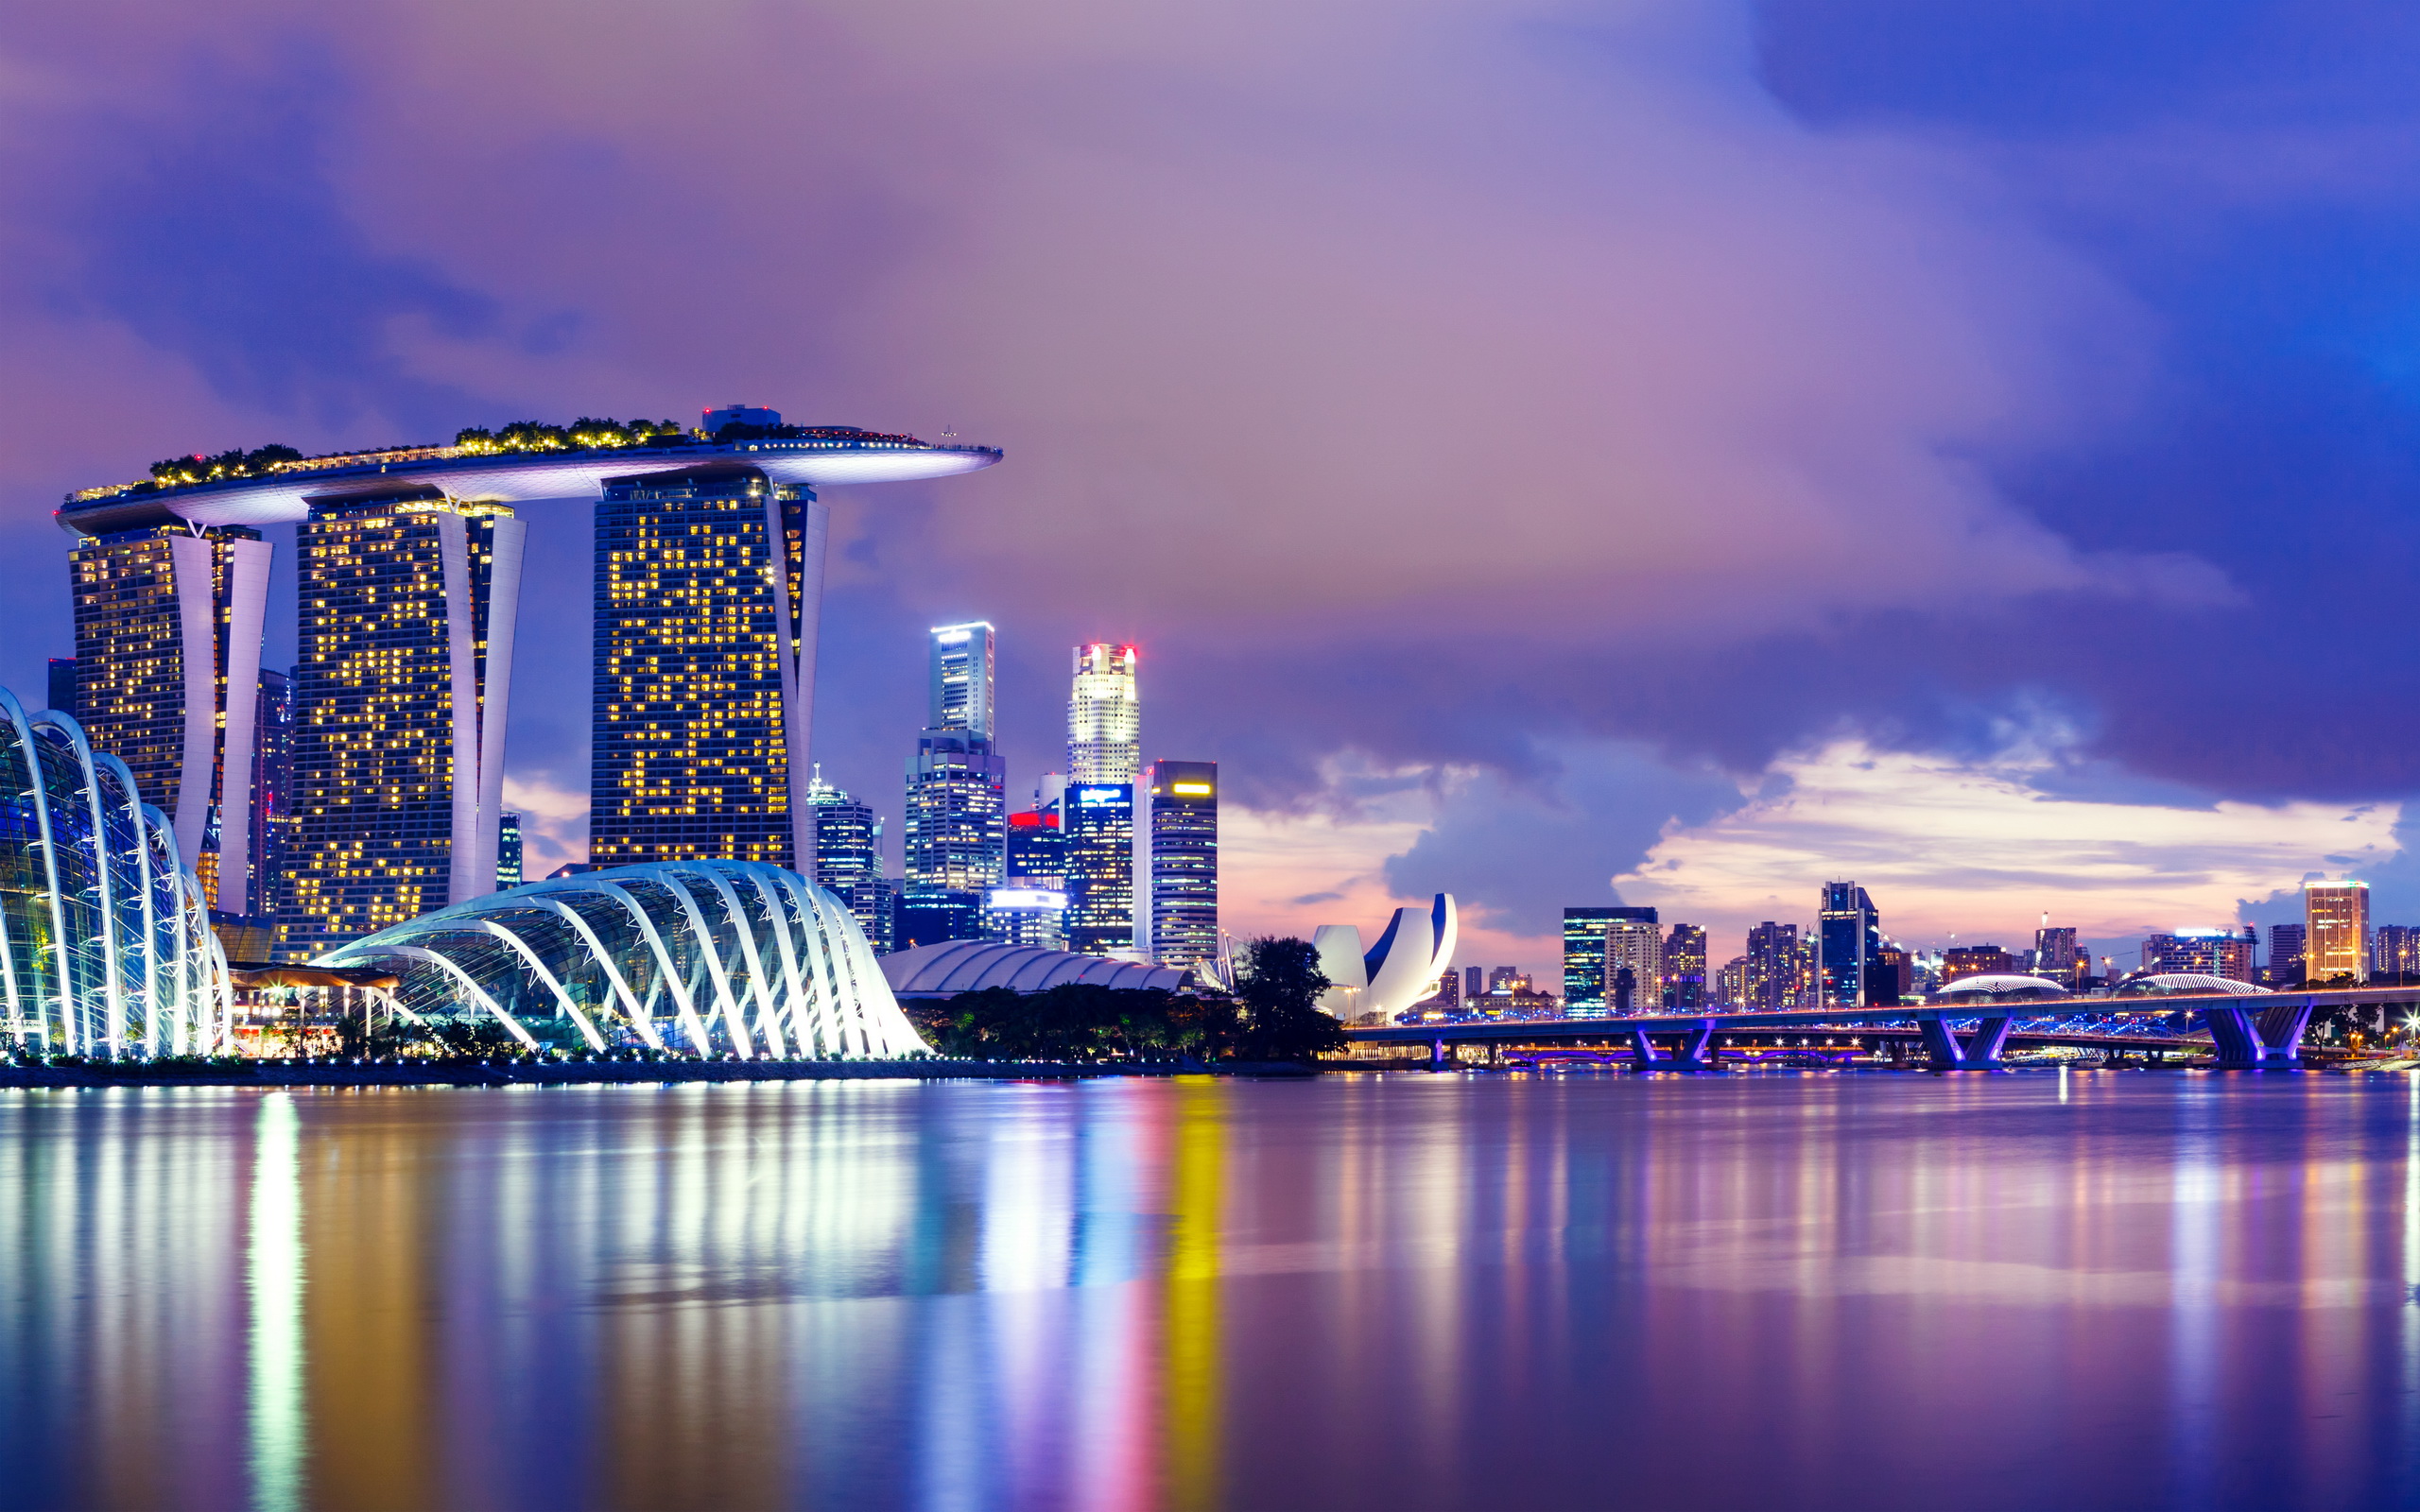 places to visit in marina bay singapore